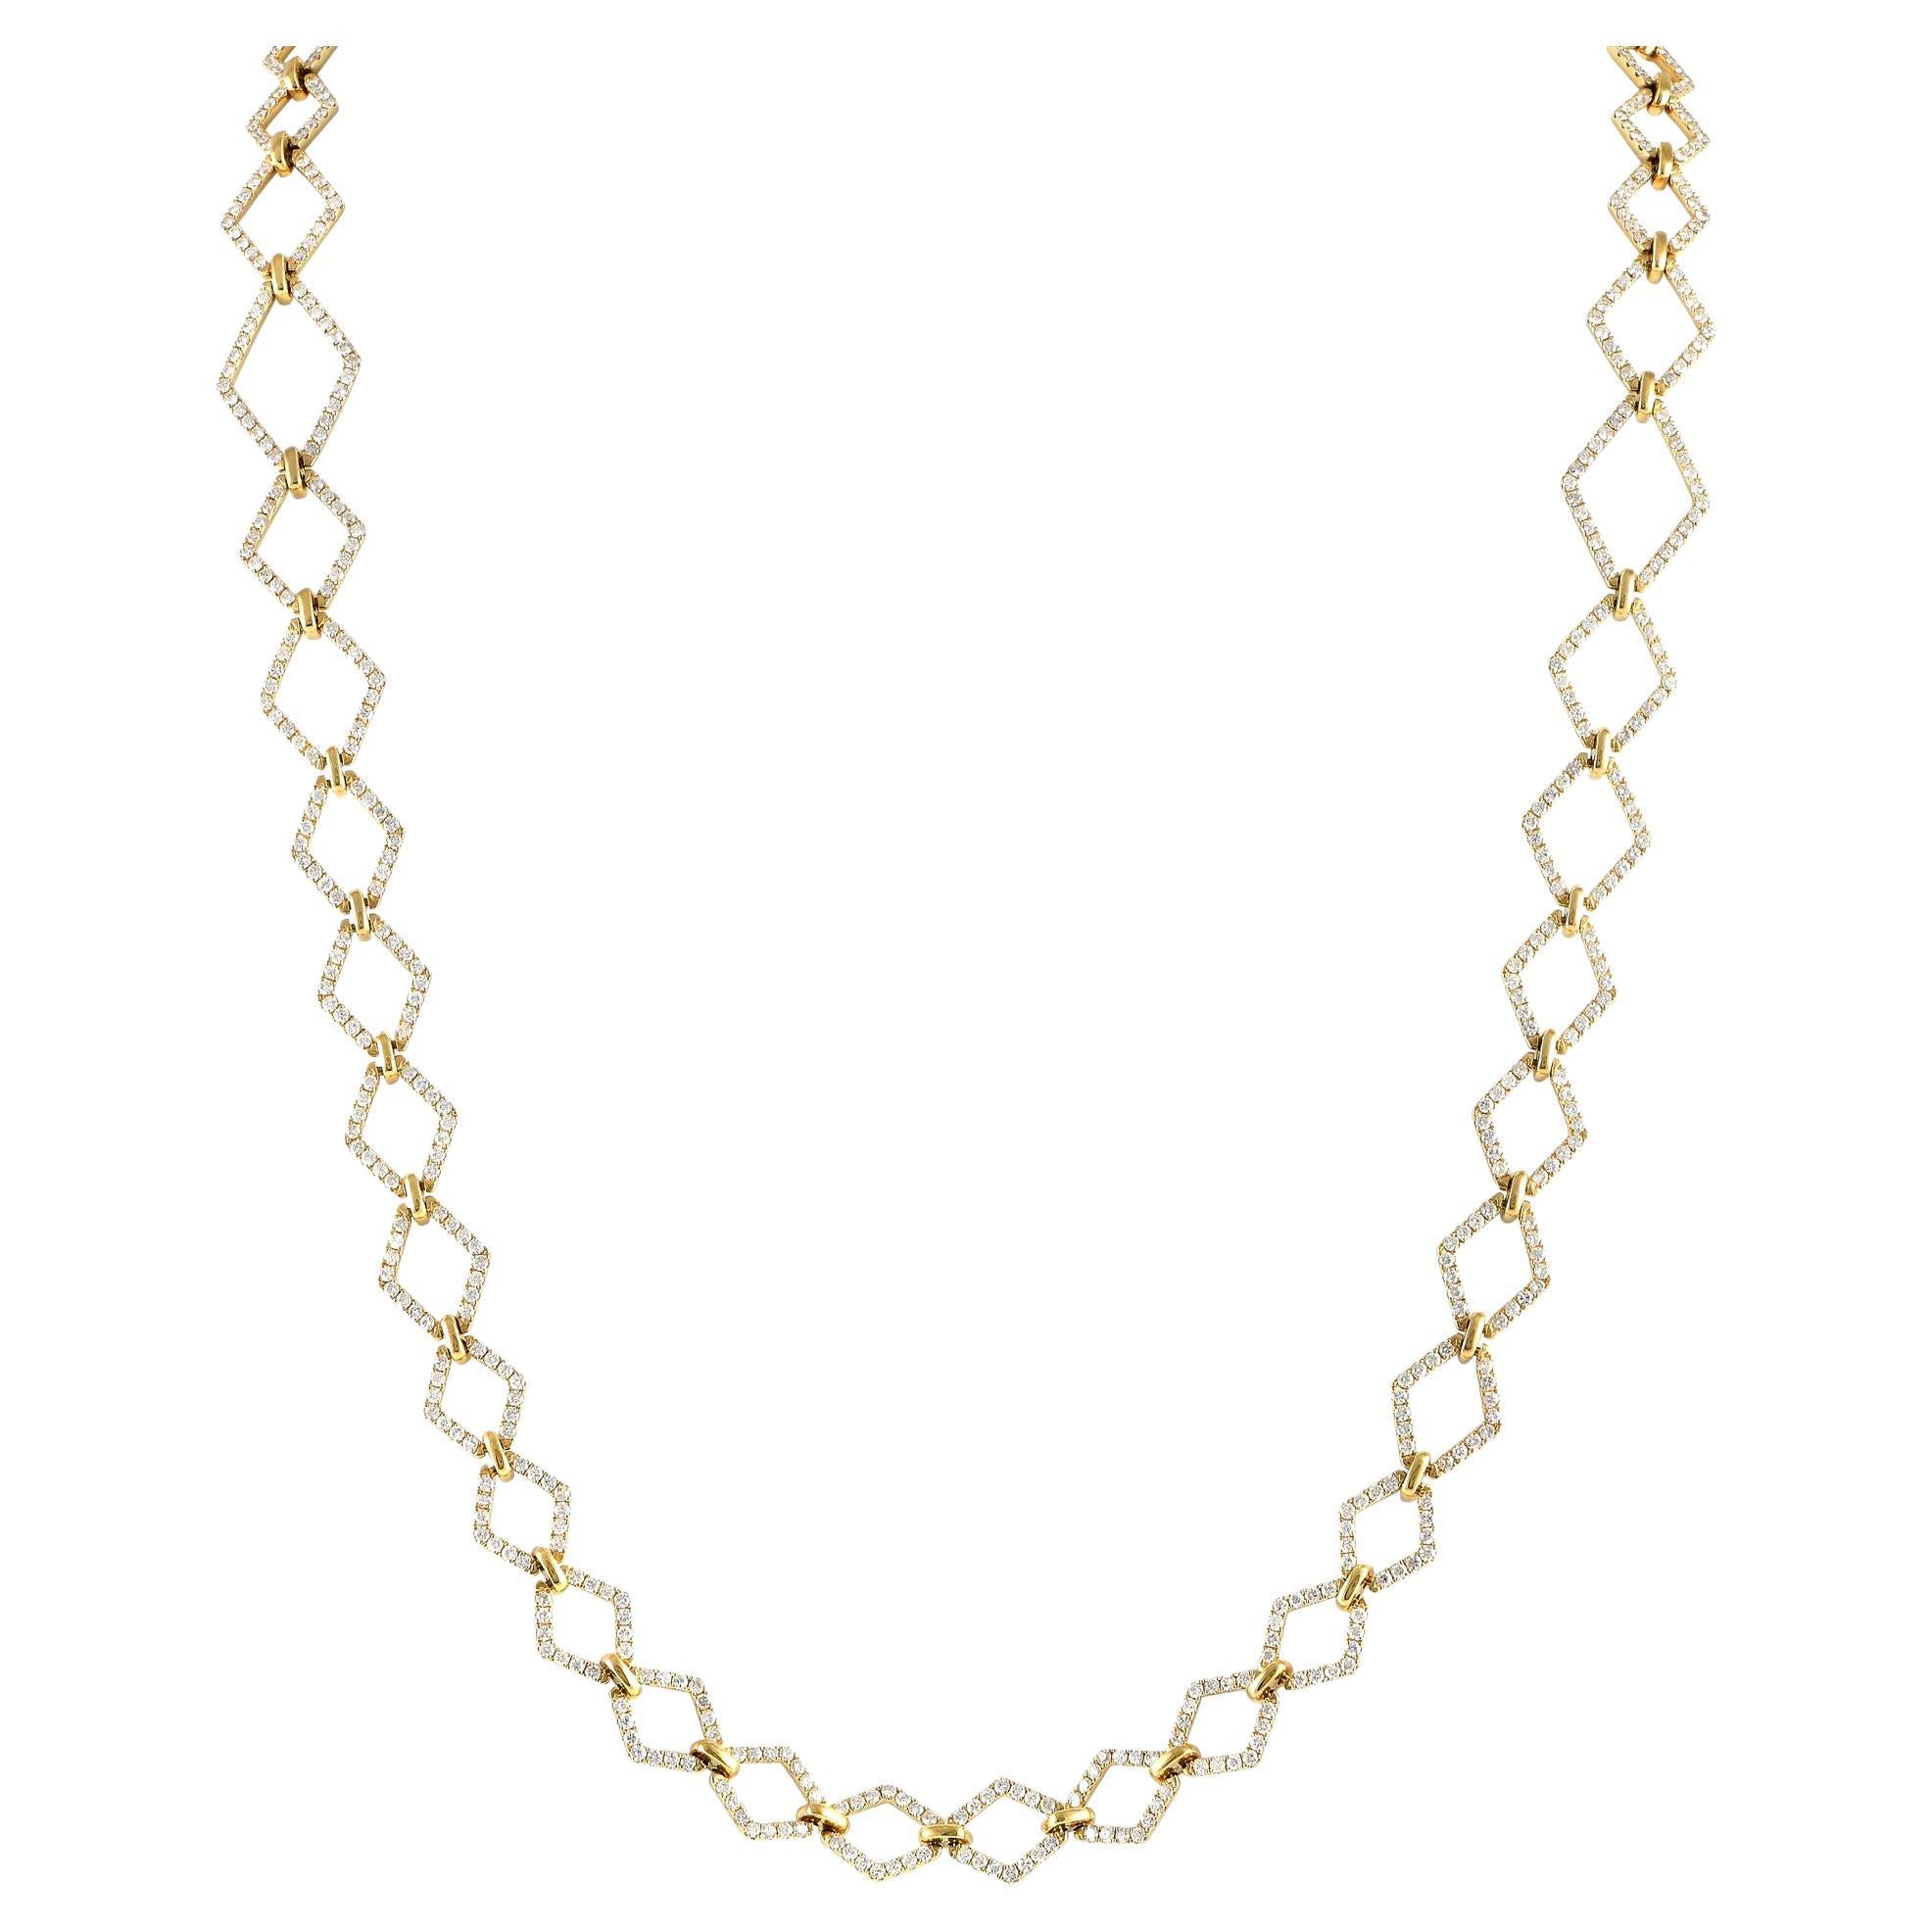 LB Exclusive 18K Yellow Gold 10.60ct Diamond Necklace For Sale